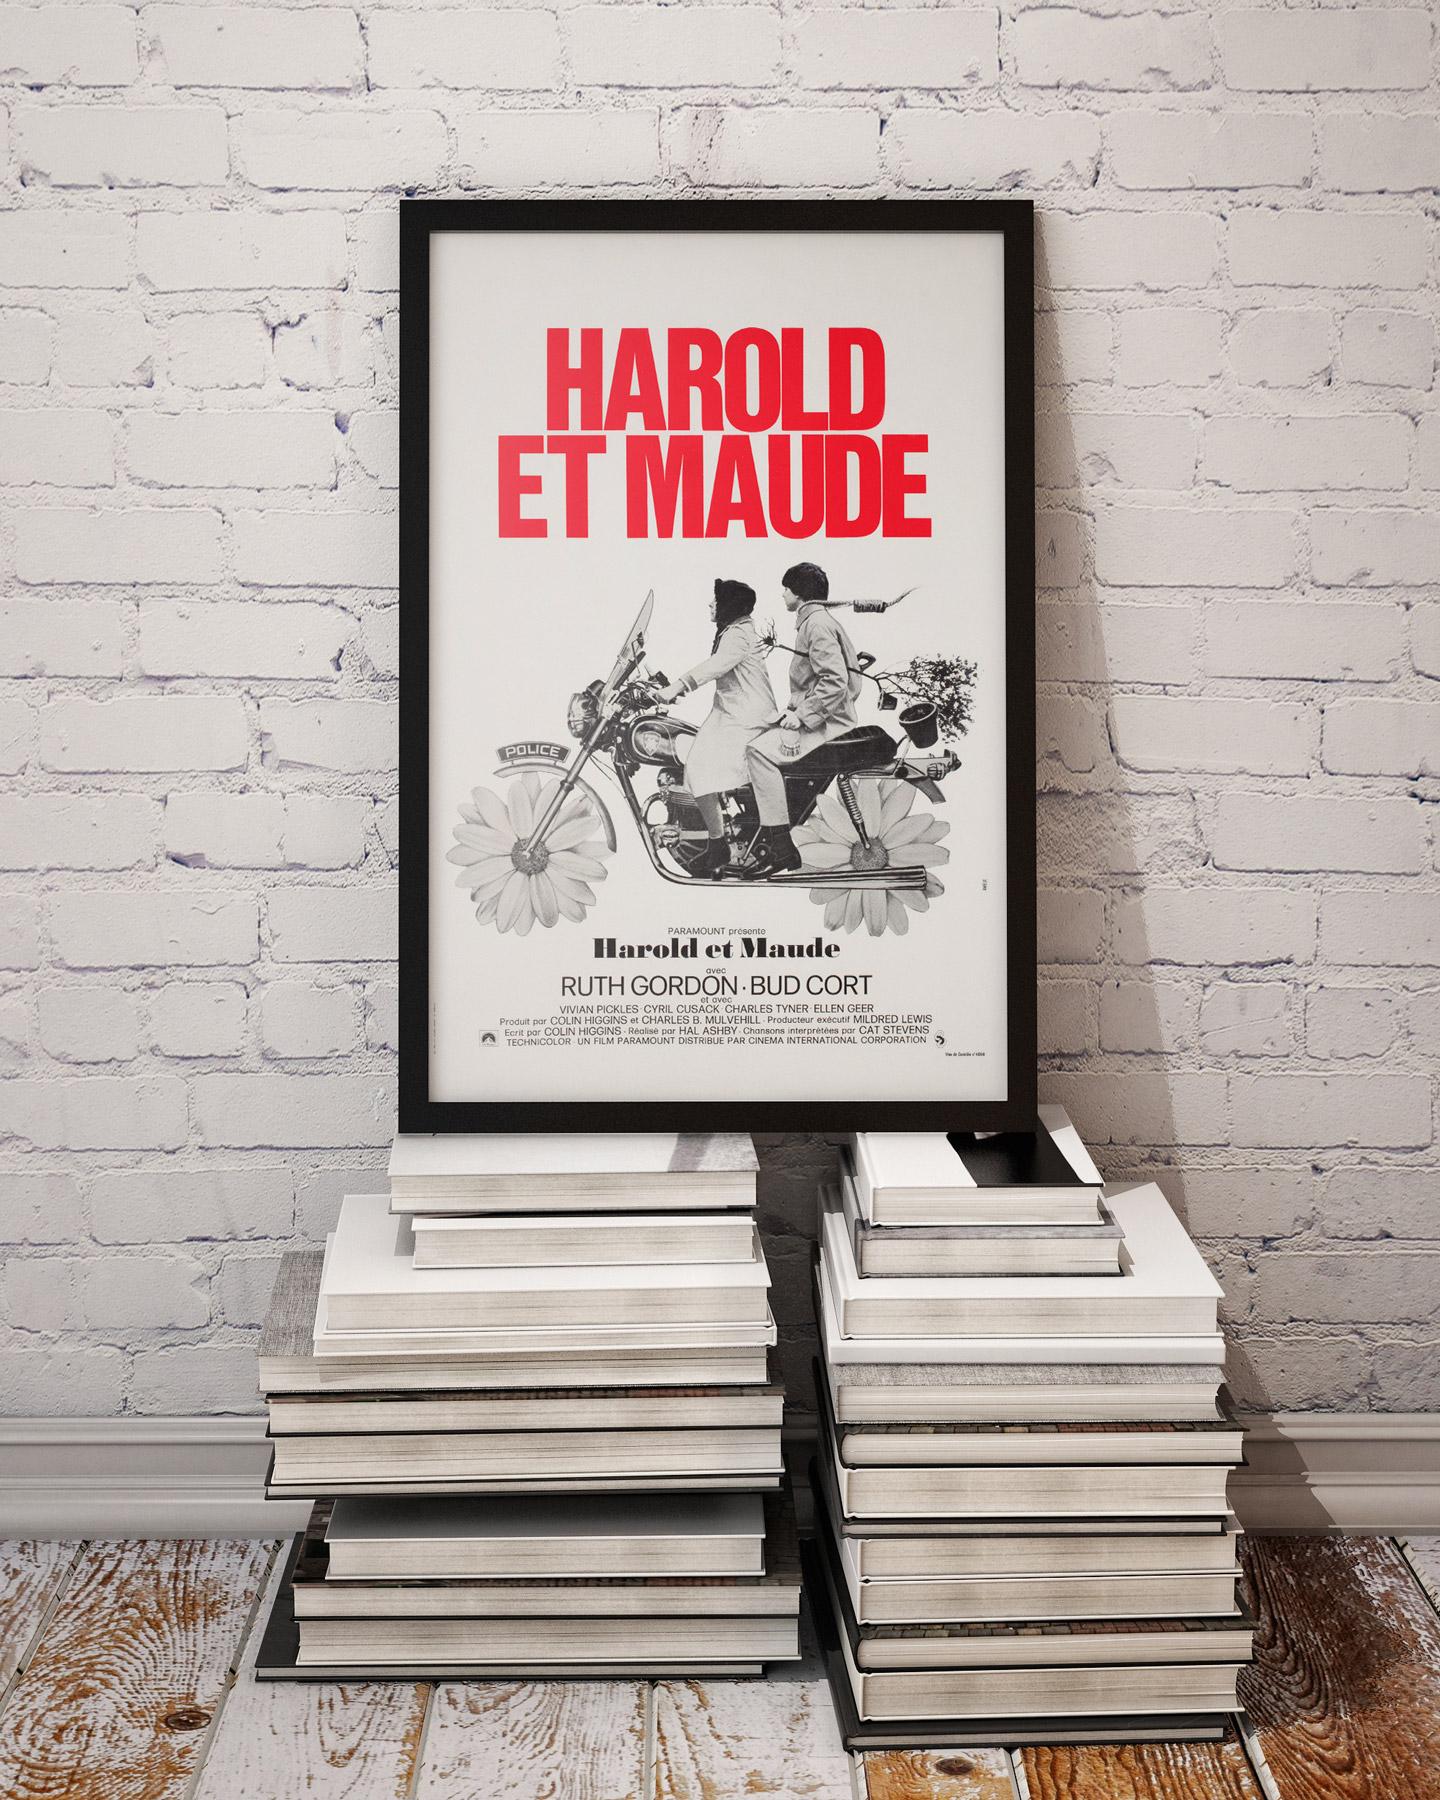 Wonderful original French film poster for 1970s quirky romcom Classic Harold & Maude. Young, rich, and obsessed with death, Harold finds himself changed forever when he meets Maude at a funeral.

This cute French poster features great artwork for